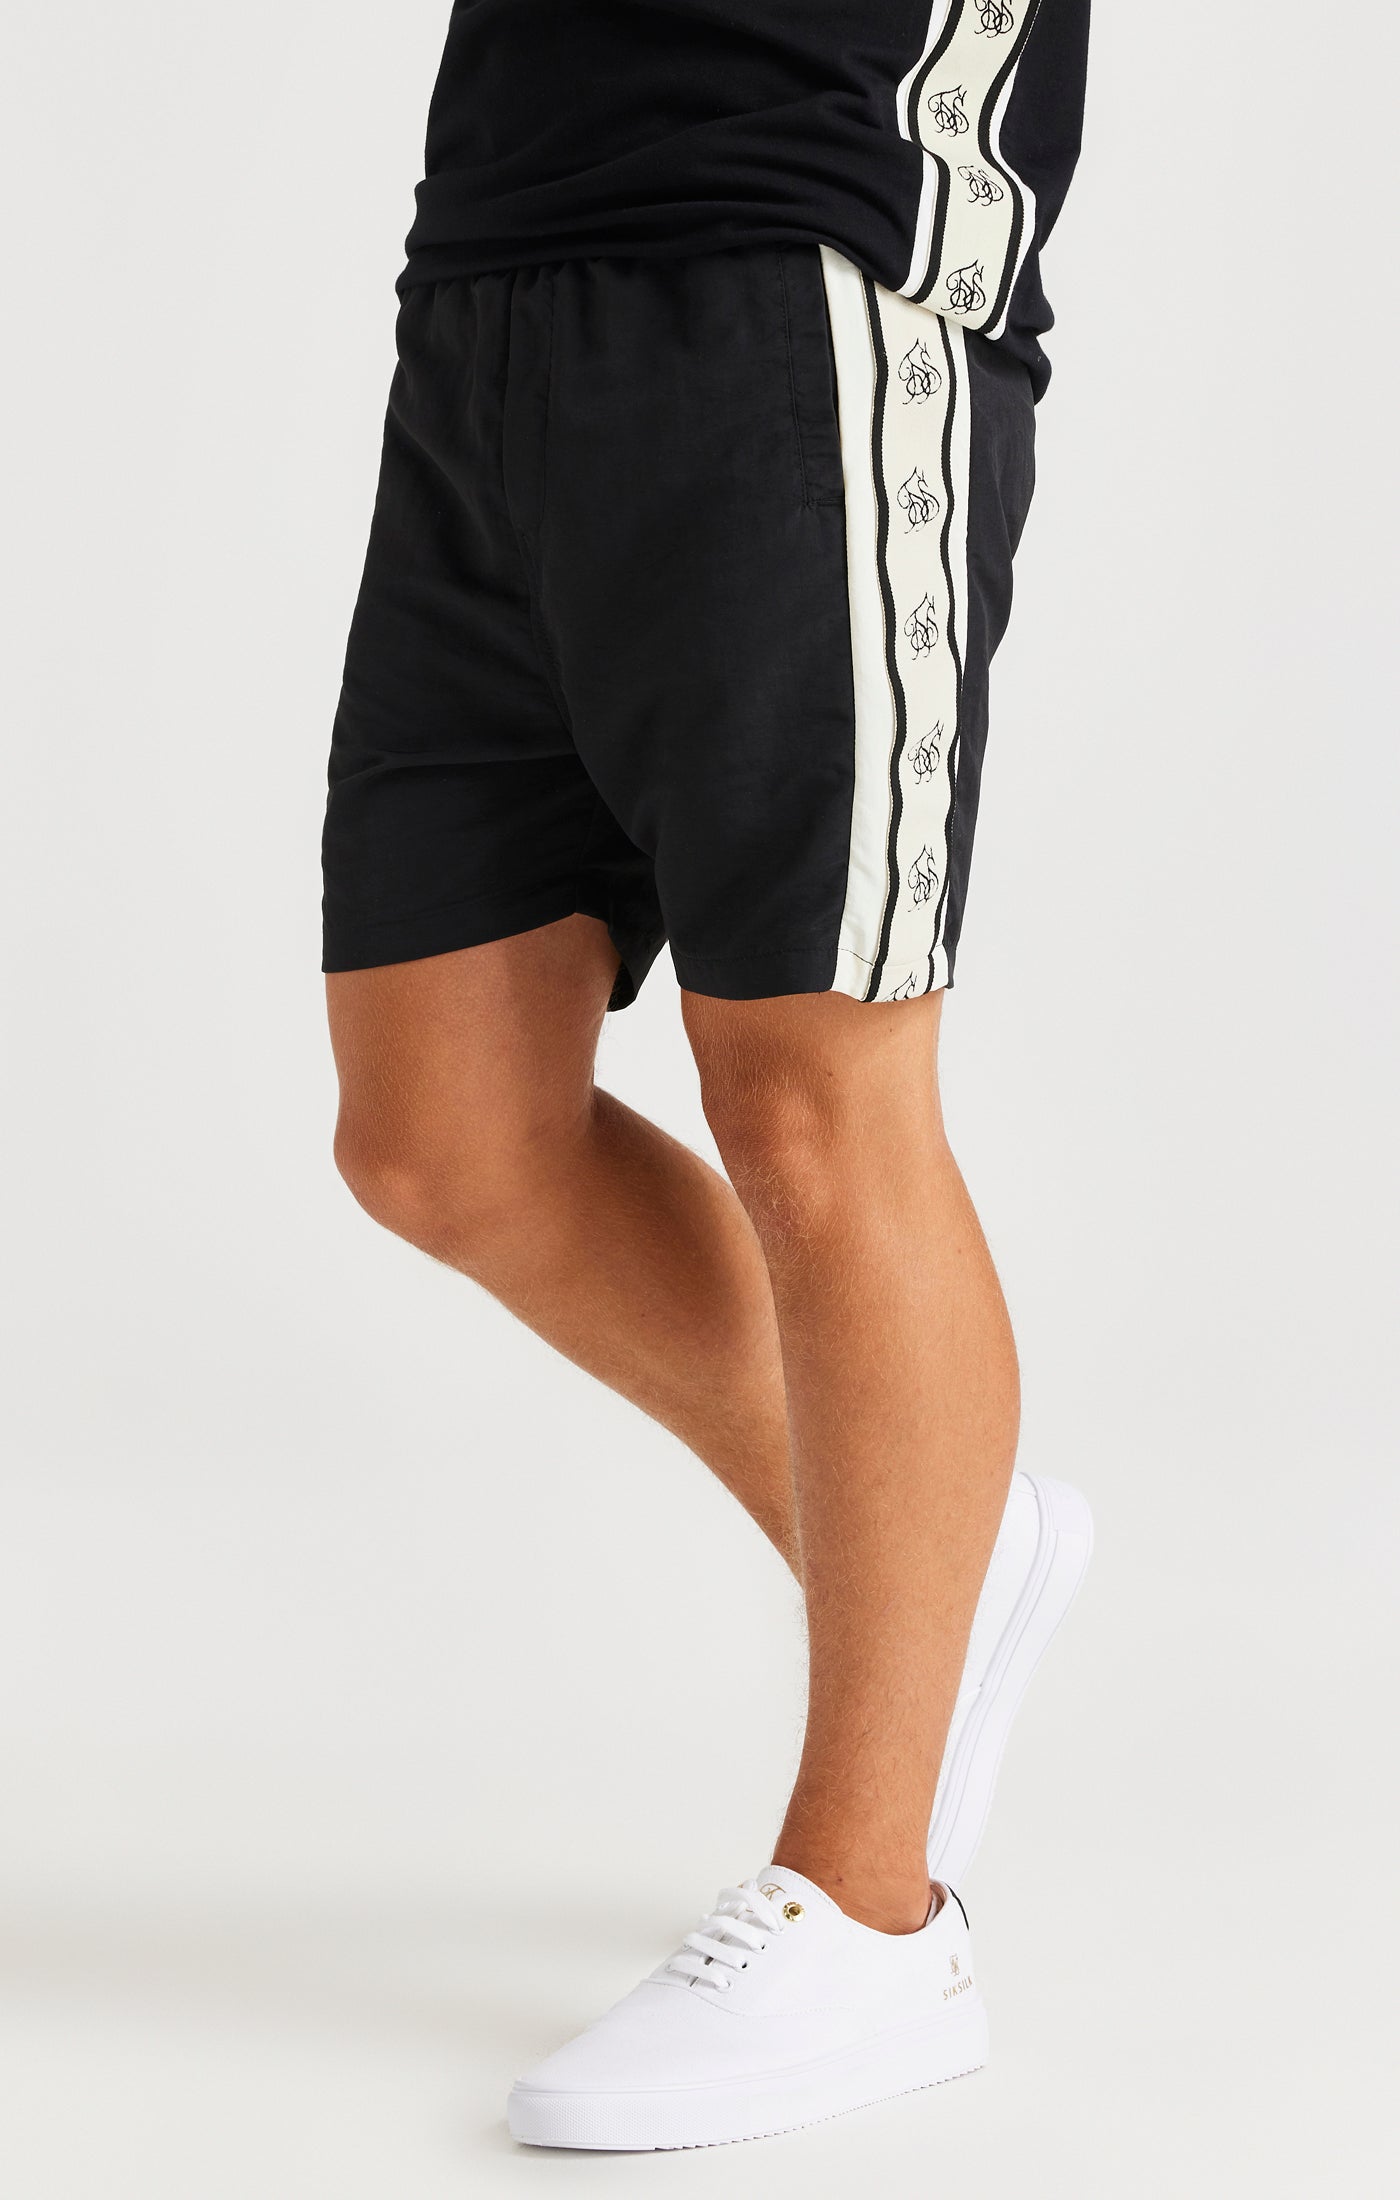 Load image into Gallery viewer, SikSilk Cali Tape Shorts - Black